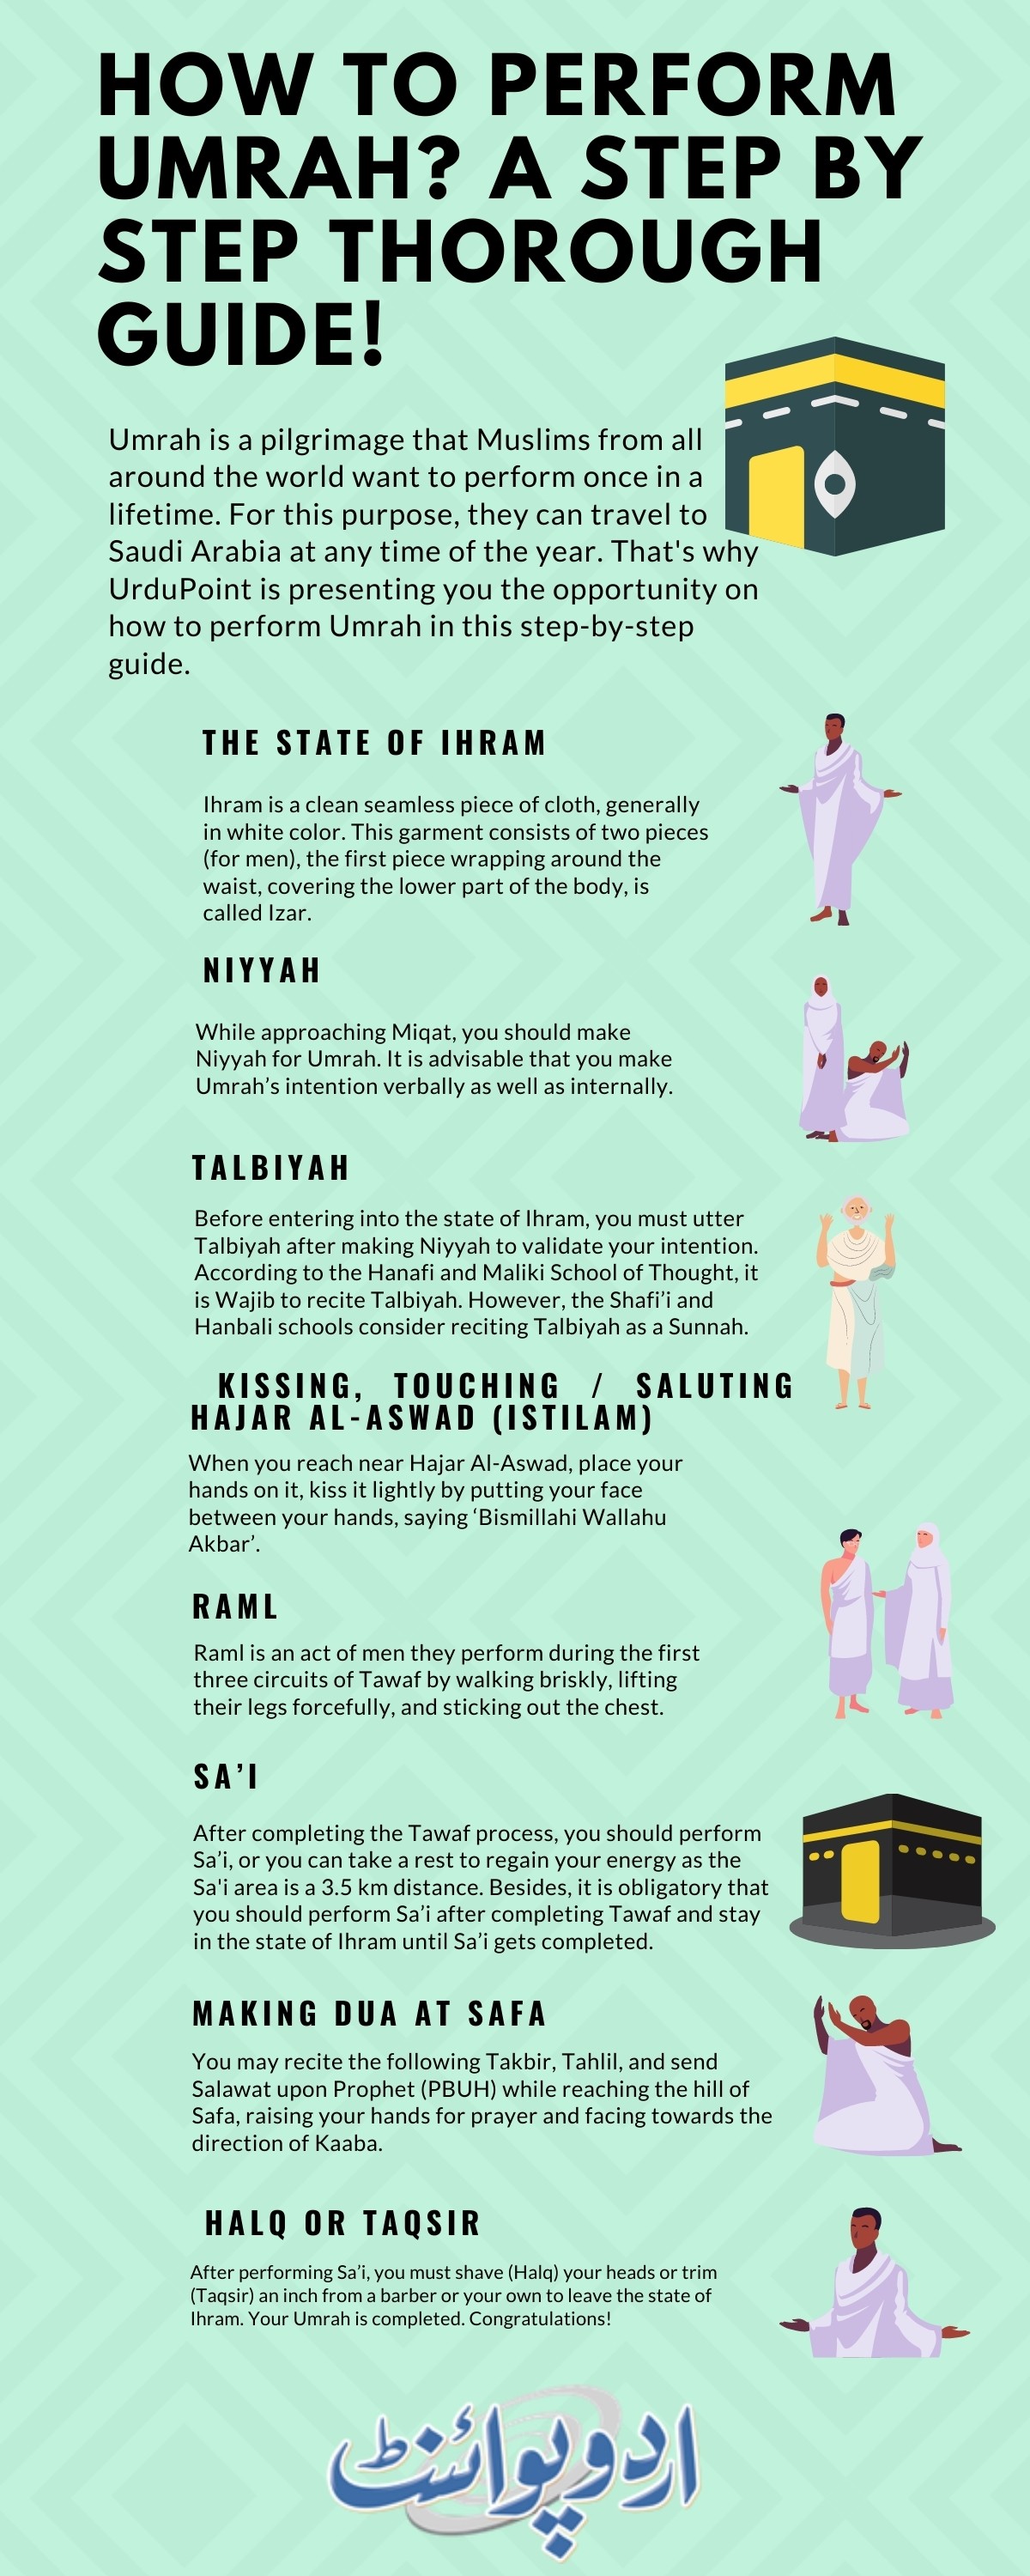 How to perform Umrah? A Step by Step Guide